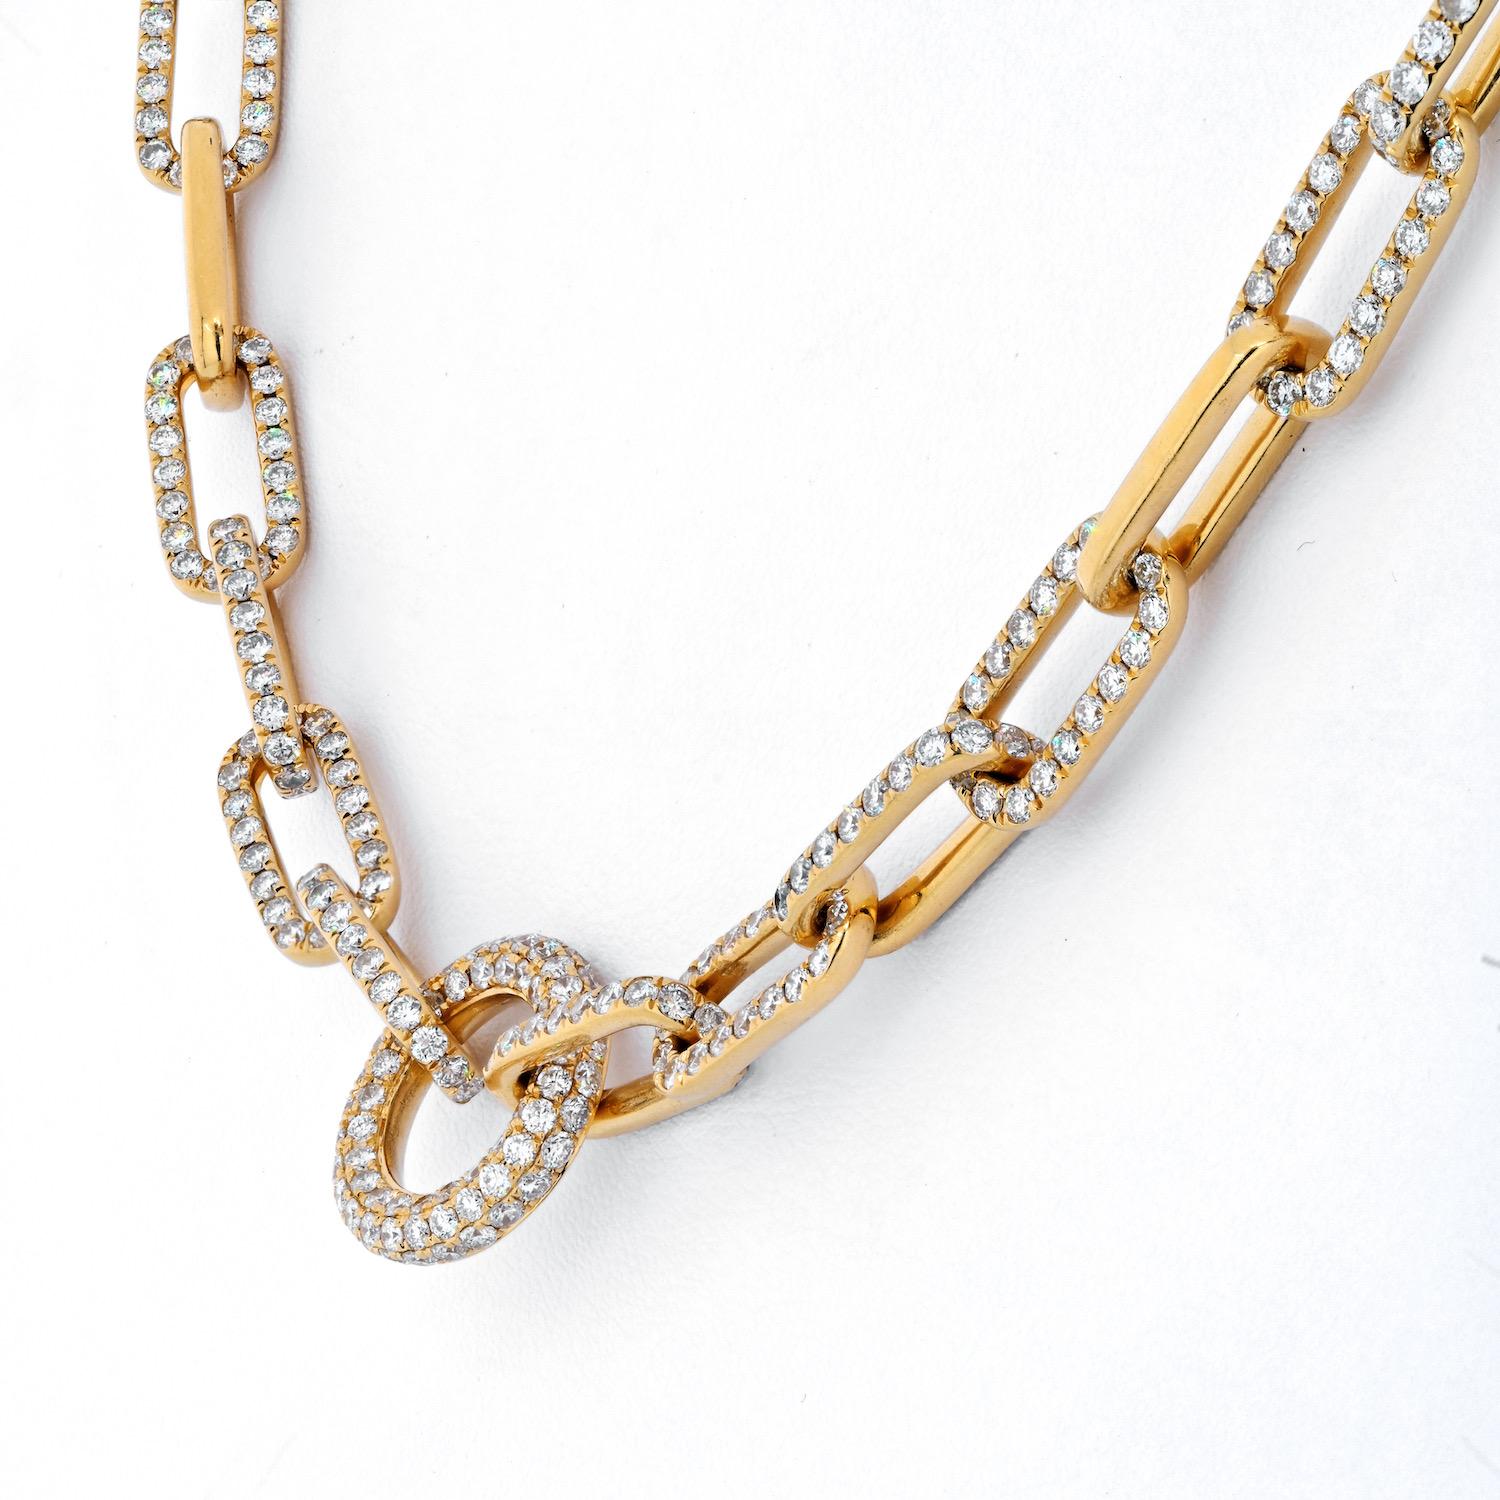 Diamond link chain necklaces are the latest trend. Think about layers and create your own neck mess wearing this fab item. This diamond link necklace is 24 inches long, wear it over white T or under the blazer, make it your statement item when